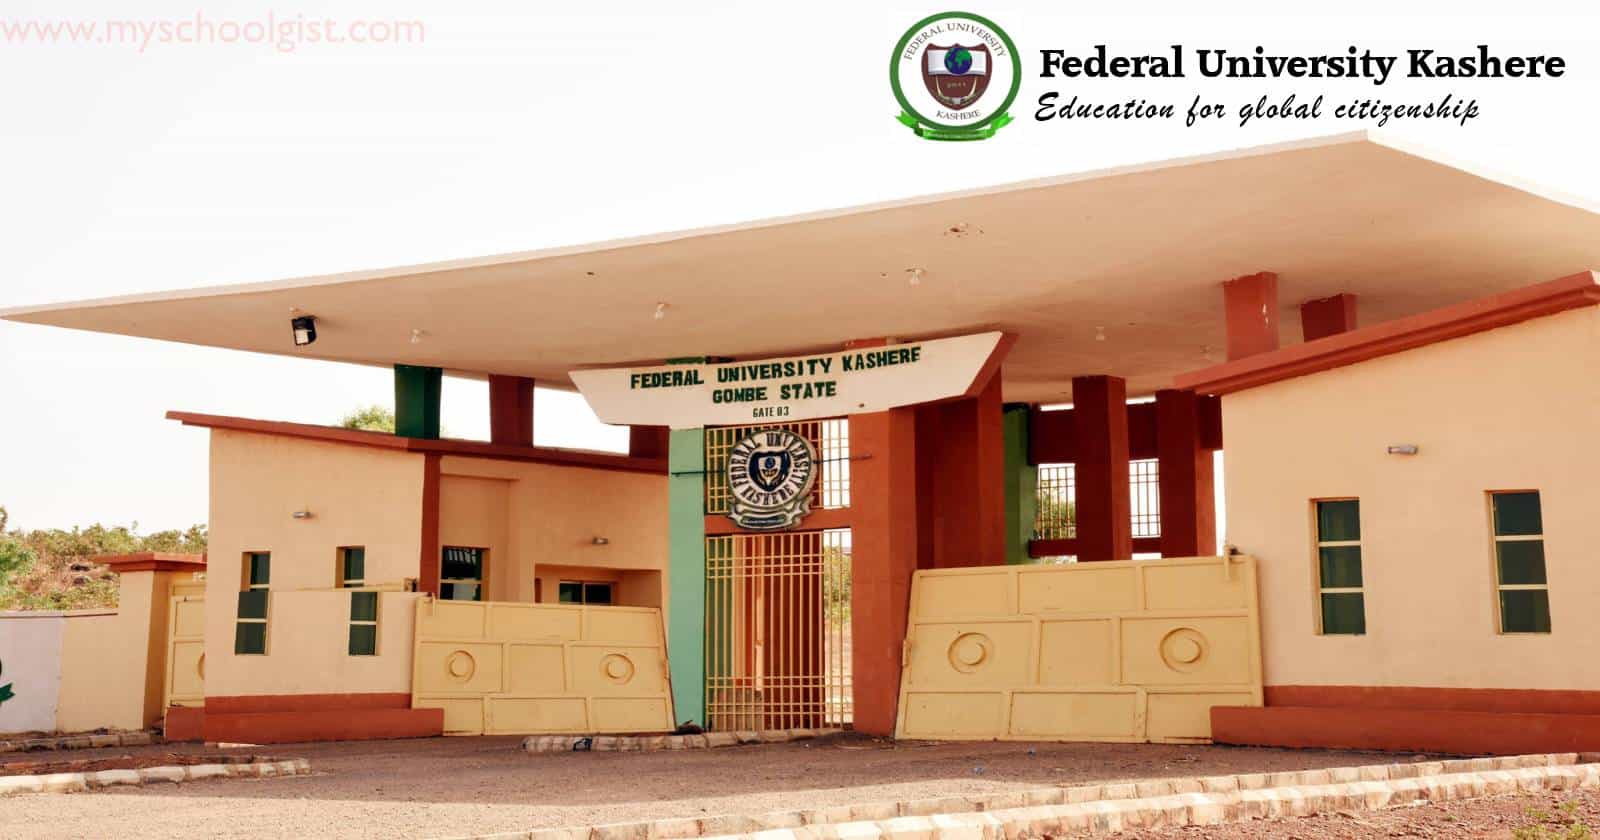 Supplementary Admission List for the Federal University of Kashere (FUKashere)